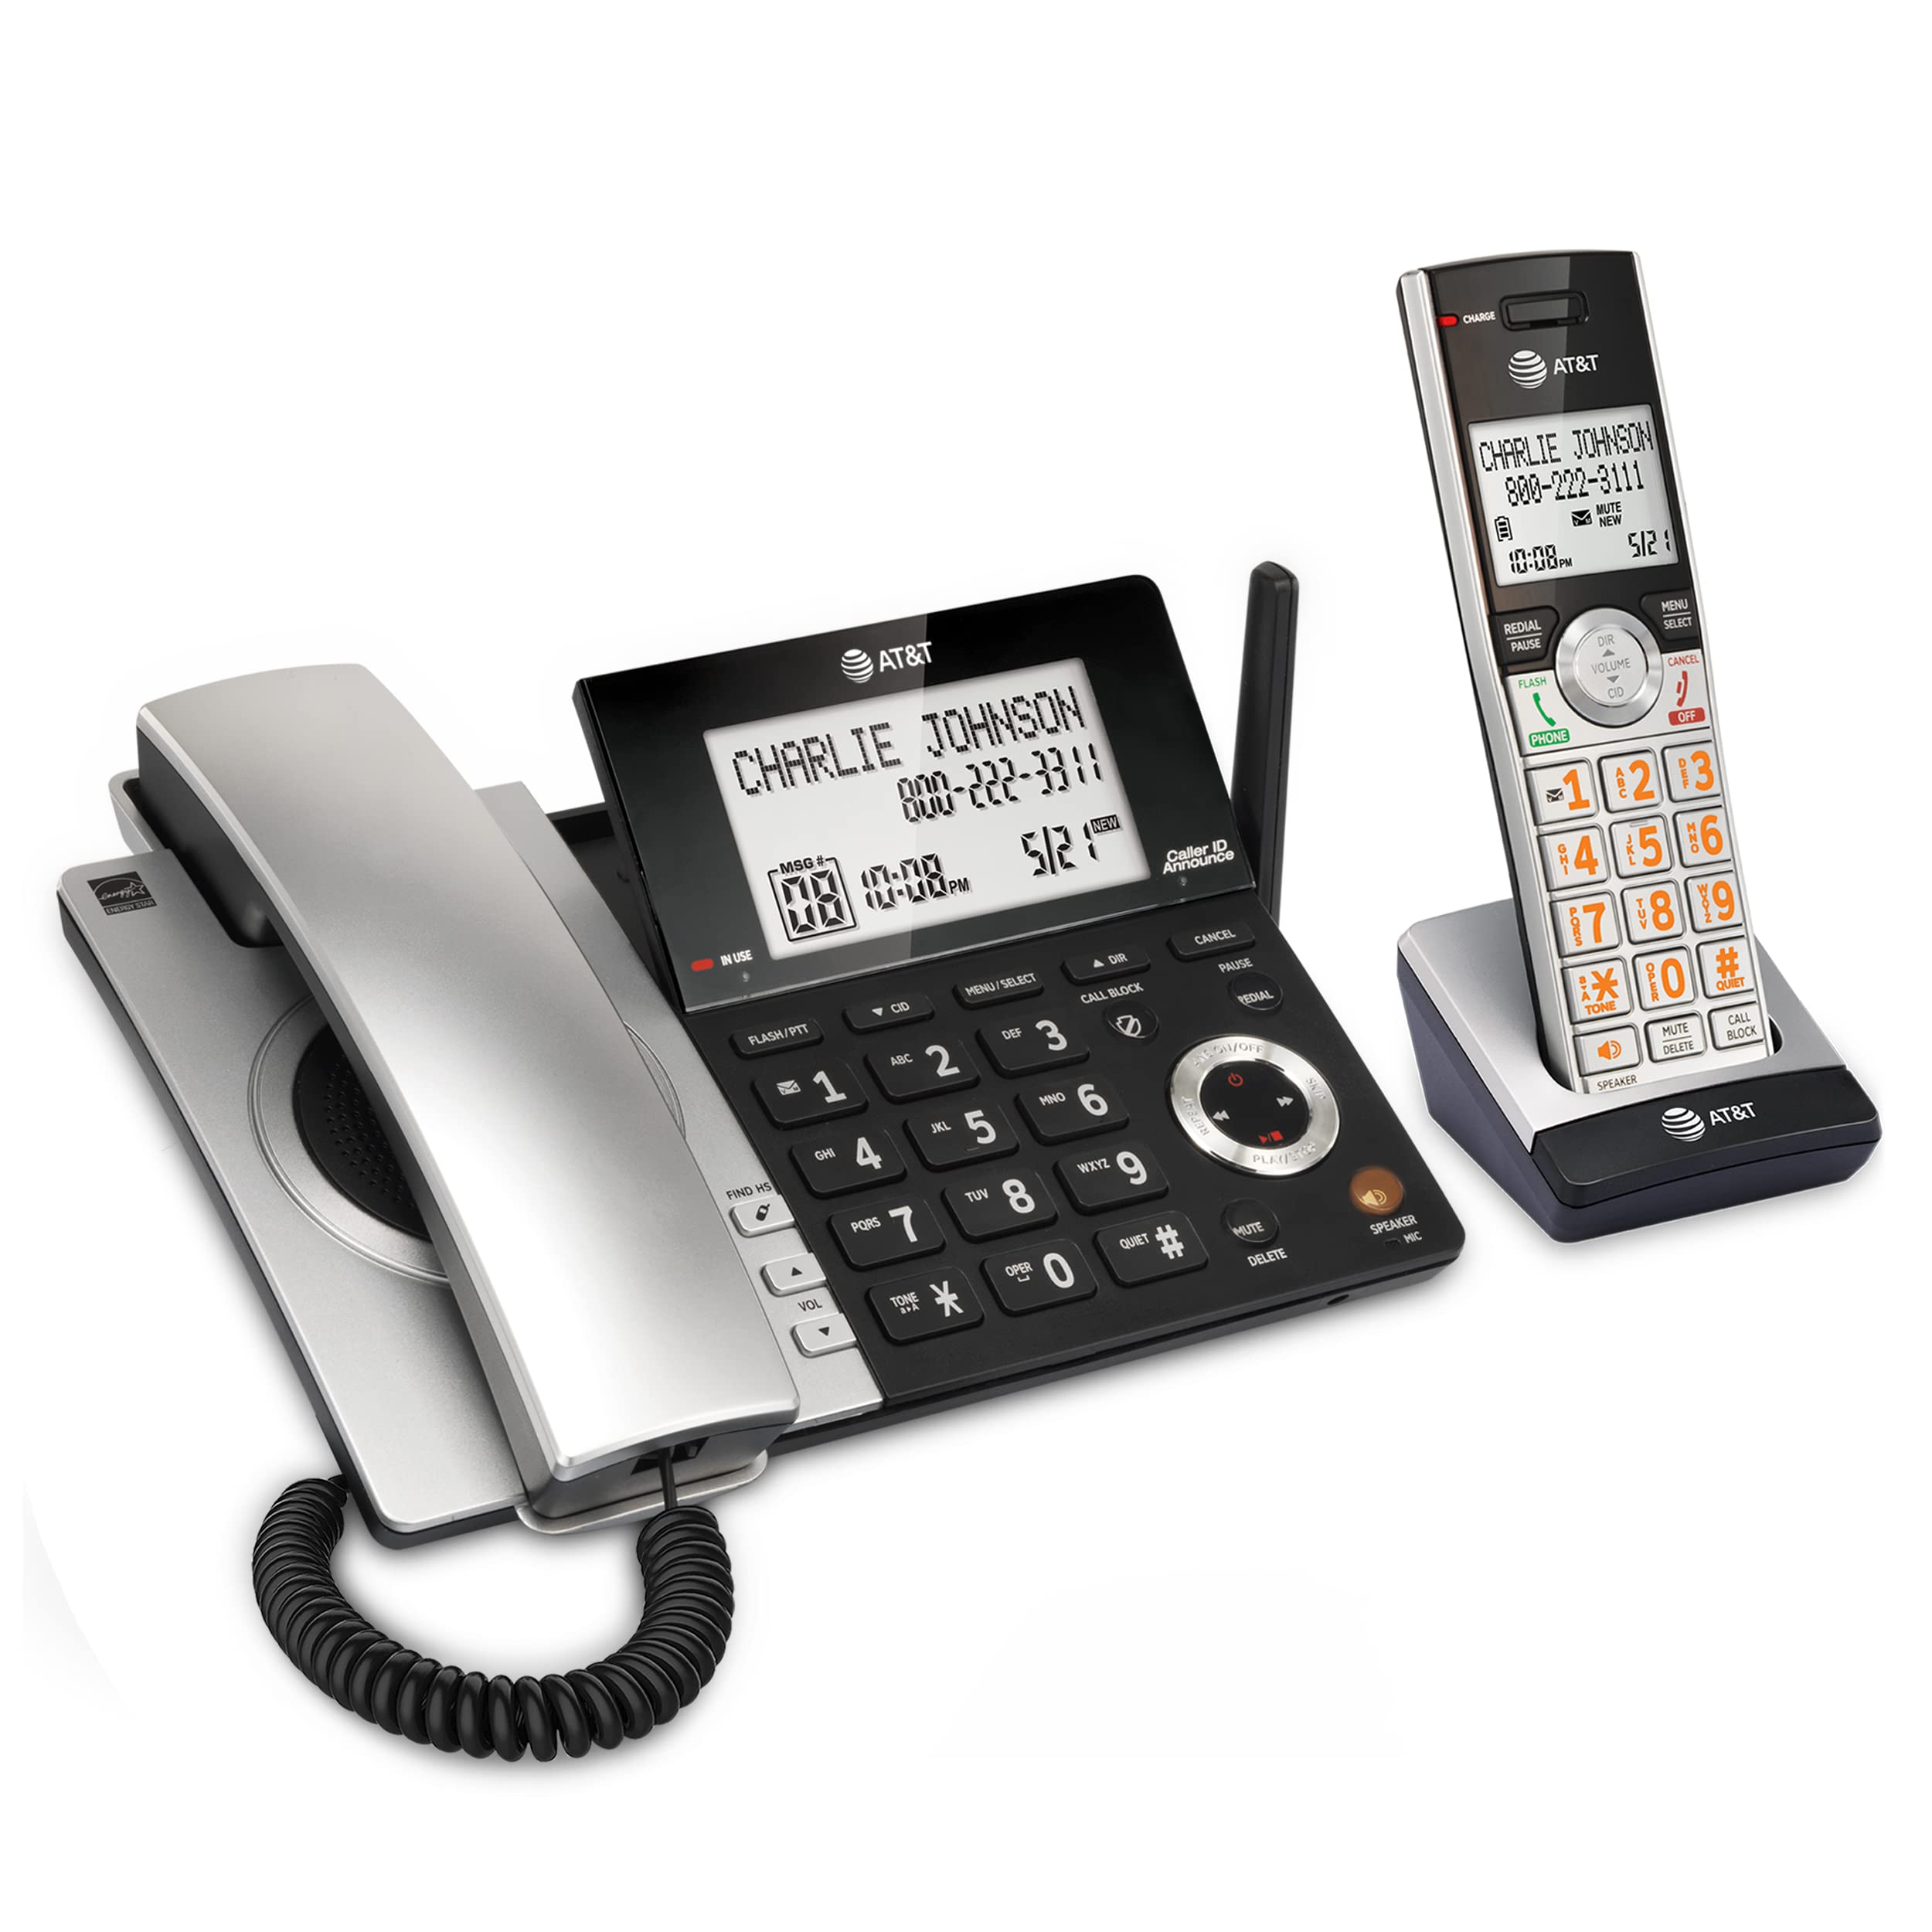 AT&T CL84107 DECT 6.0 Expandable Corded/Cordless Phone with Smart Call Blocker, Black/Silver with 1 Handset